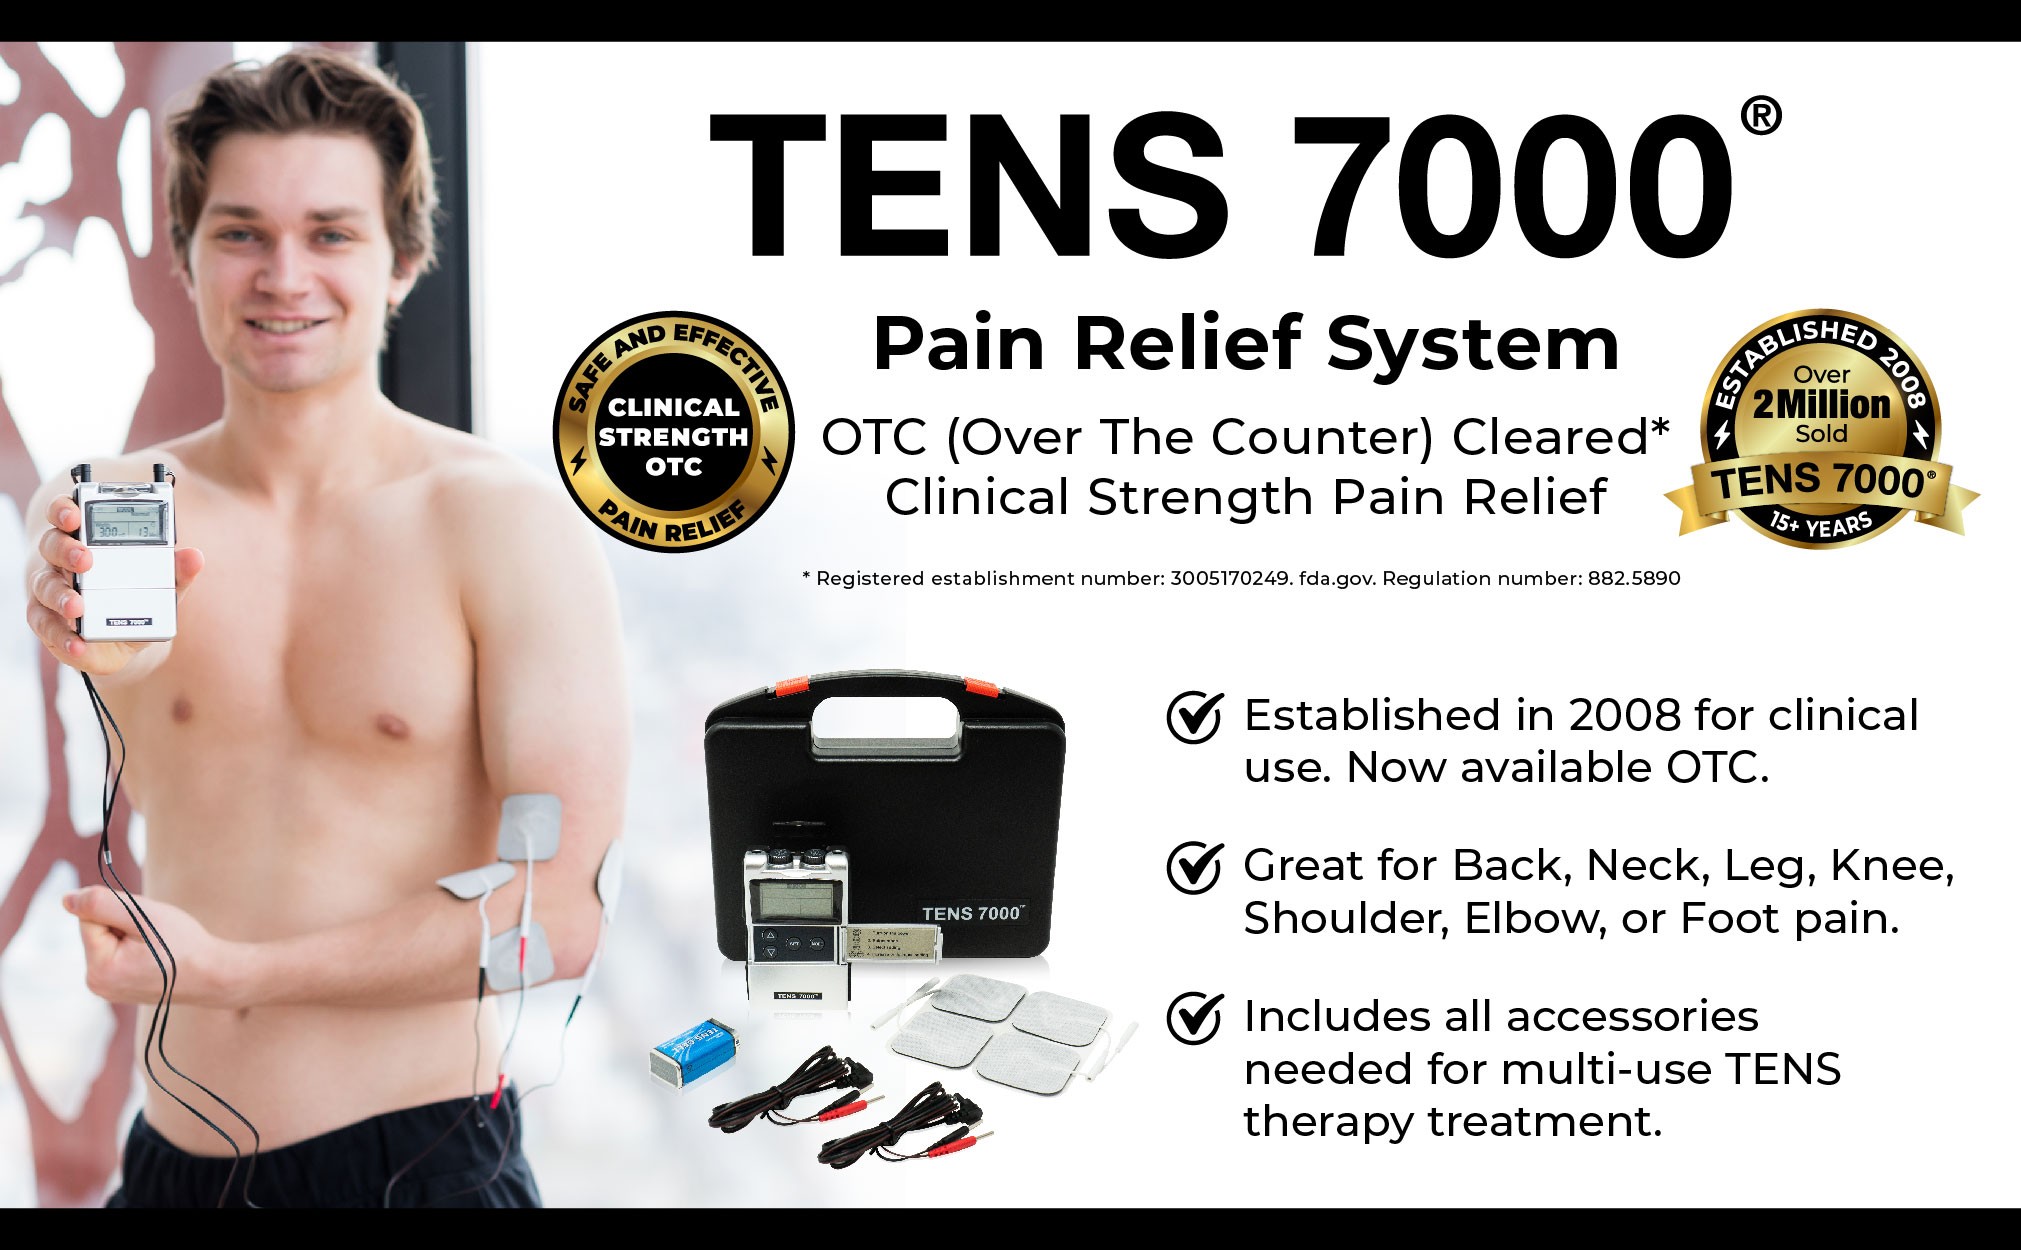 TENS 7000 Pain Relief System: OTC (Over the Counter) Cleared Clinical Strength Pain Relief